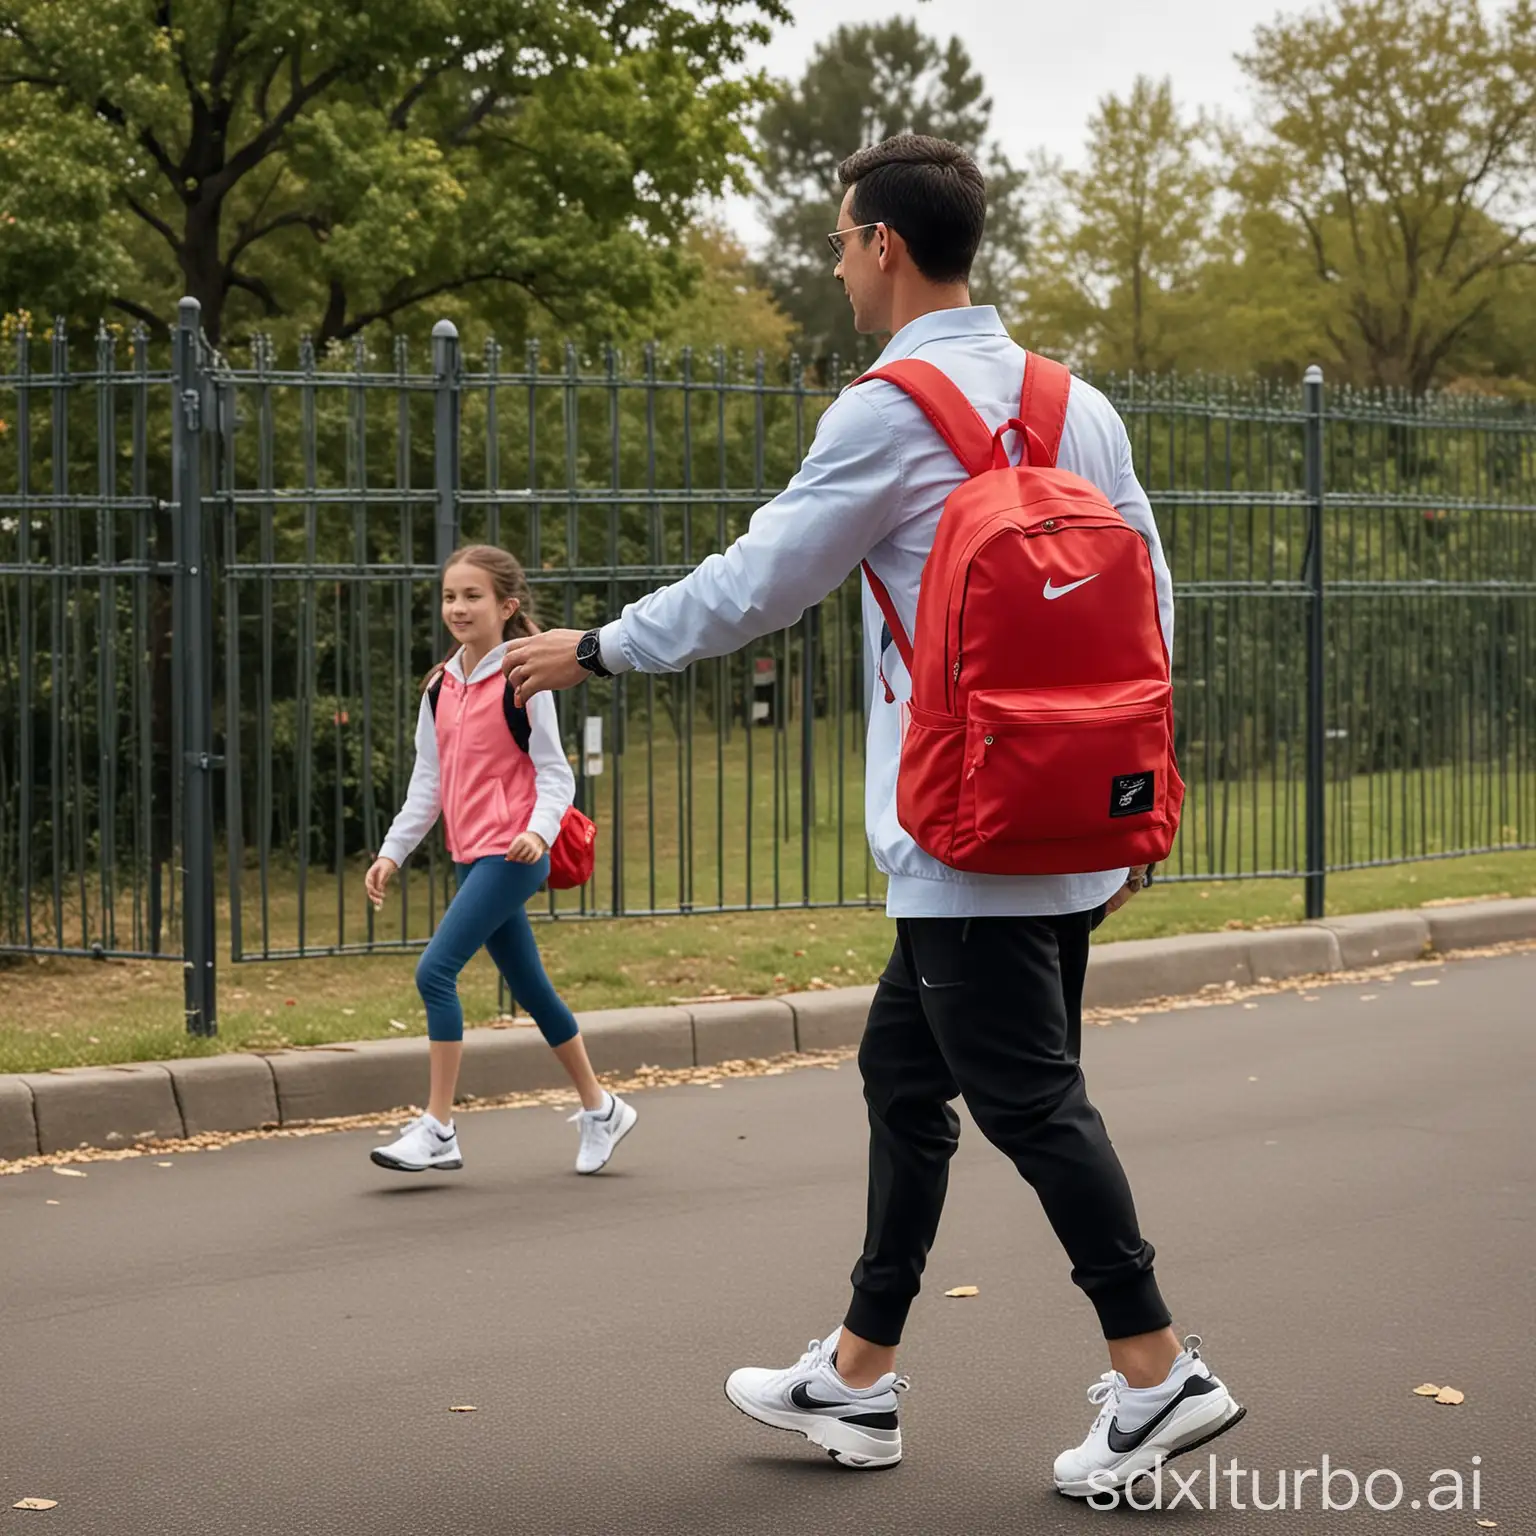 The father was wearing Nike sportswear and an Apple watch. Just as he got off the car, he saw his daughter, who was wearing a red backpack, running happily towards him at the school gate just after school.